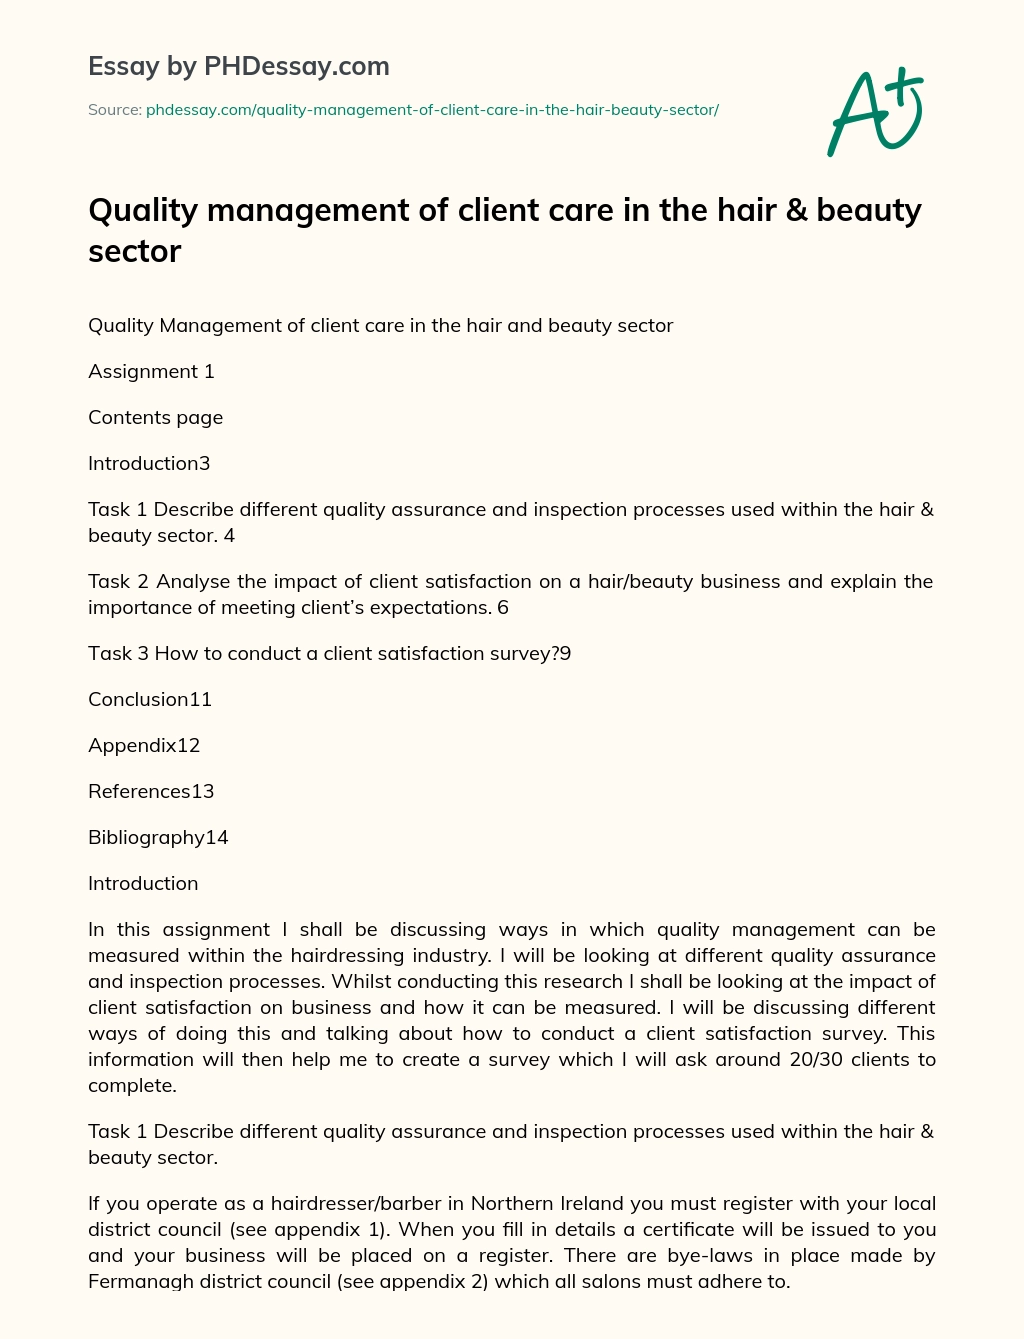 Quality management of client care in the hair & beauty sector essay